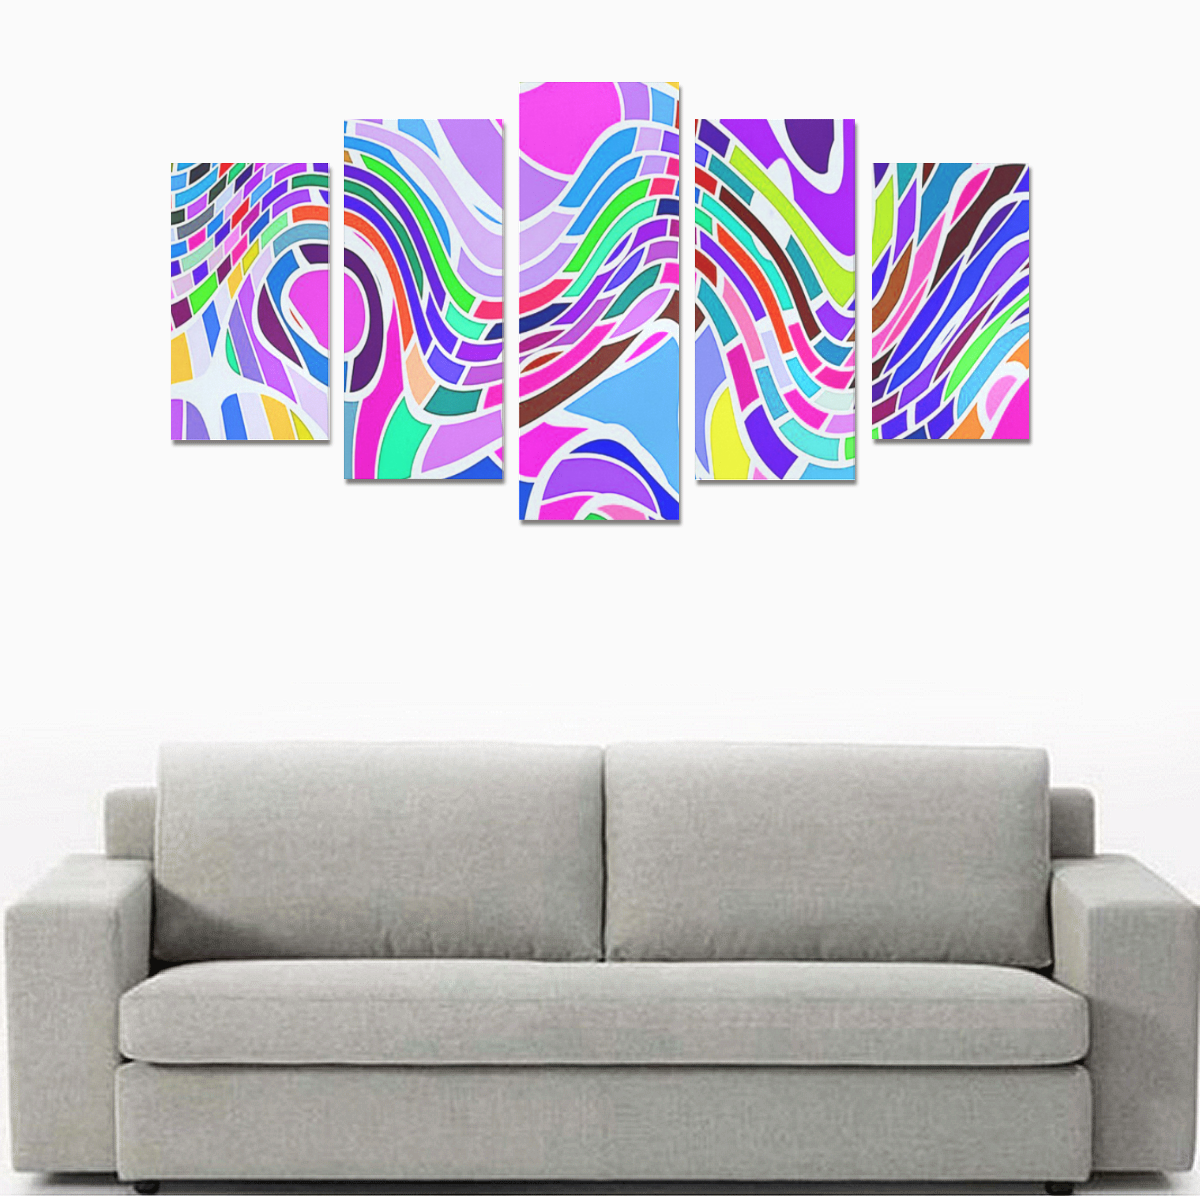 Abstract Pop Colorful Swirls Canvas Print Sets A (No Frame)